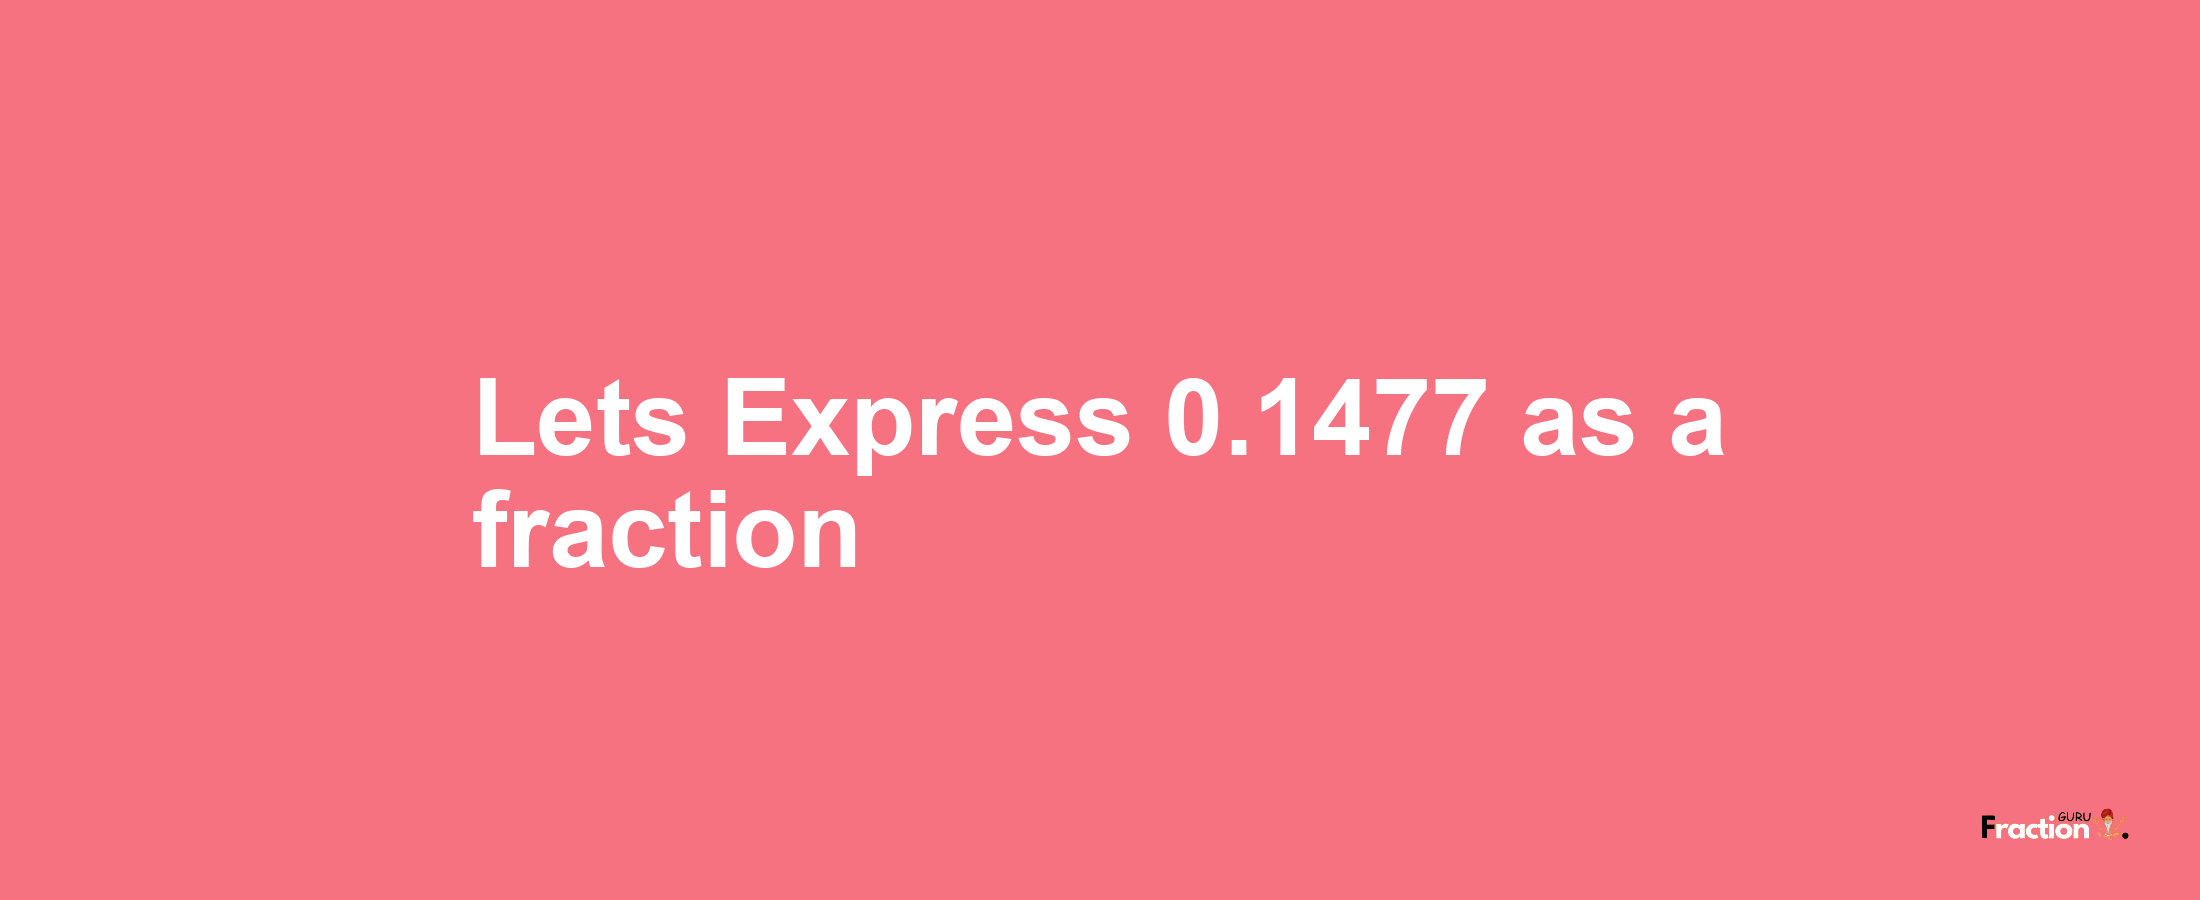 Lets Express 0.1477 as afraction